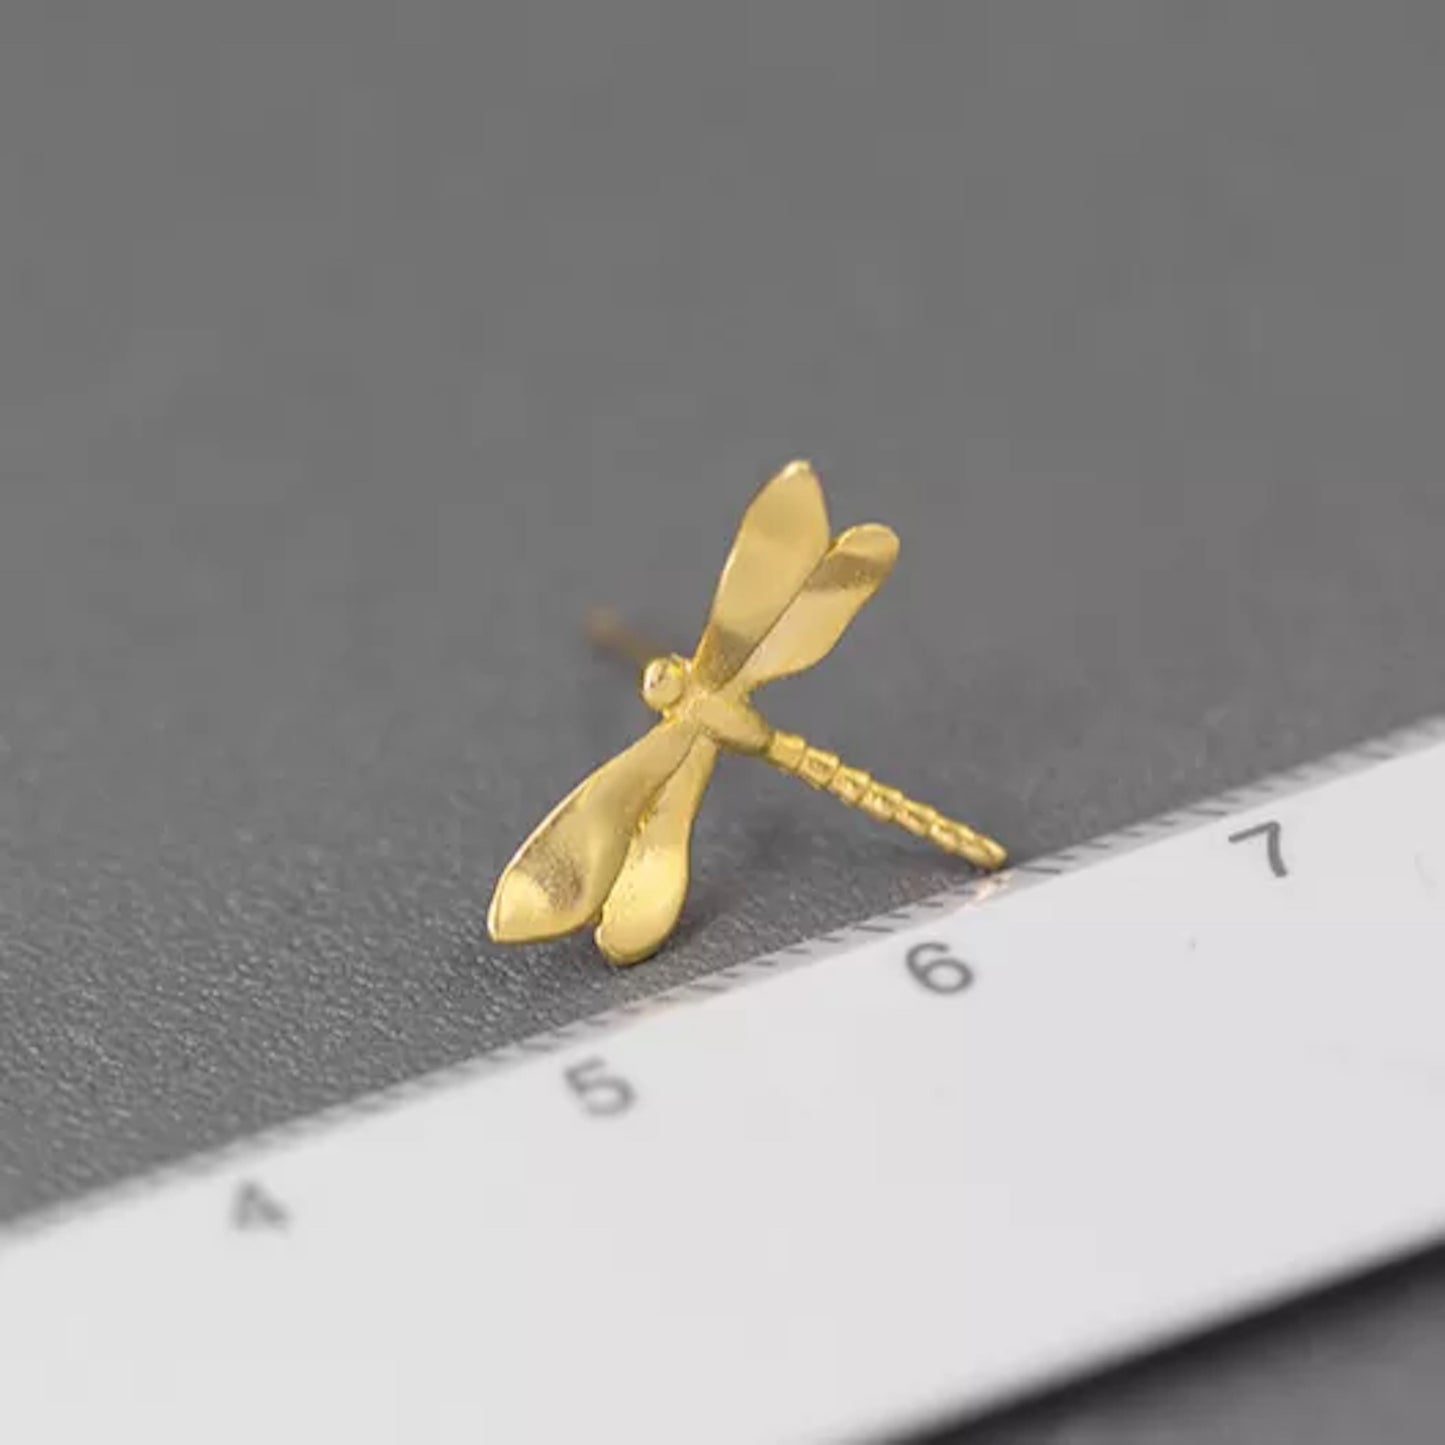 Special Edition: Cute Dragonfly 925 Sterling Silver Exquisite Ear Stud Earrings •18K Gold Plated • Unique Design • High-Quality Jewelry